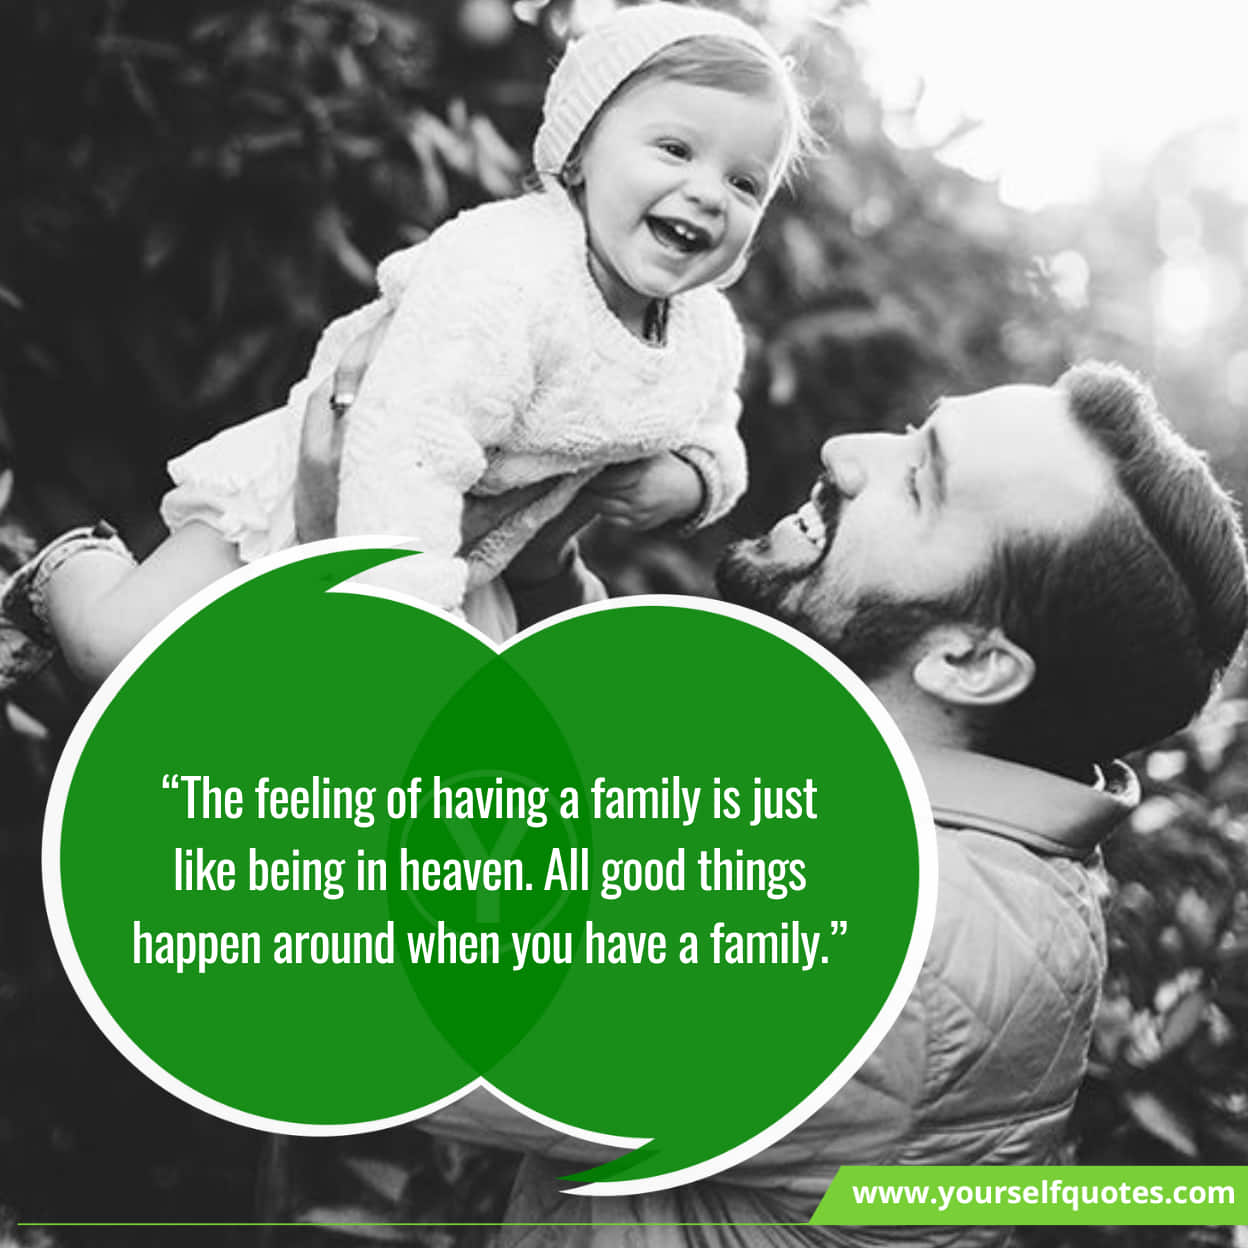 Latest Best Family Quotes About Happiness